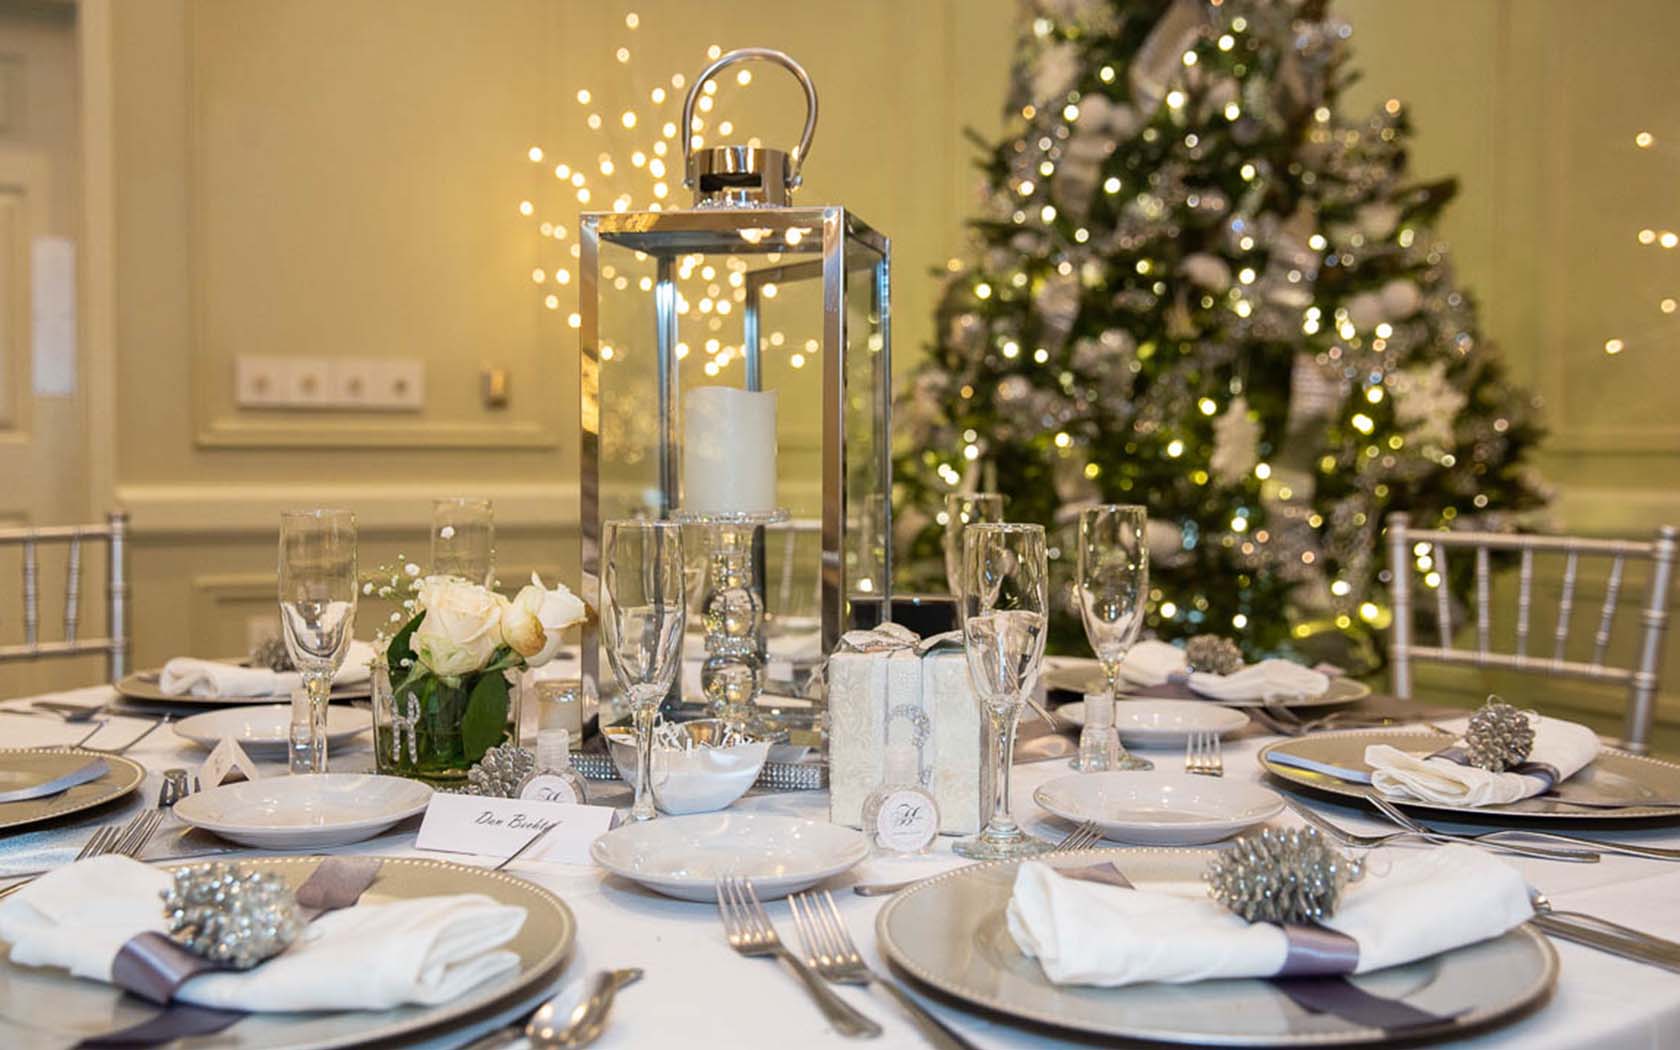 closeup view of a decorated table for an special event during december